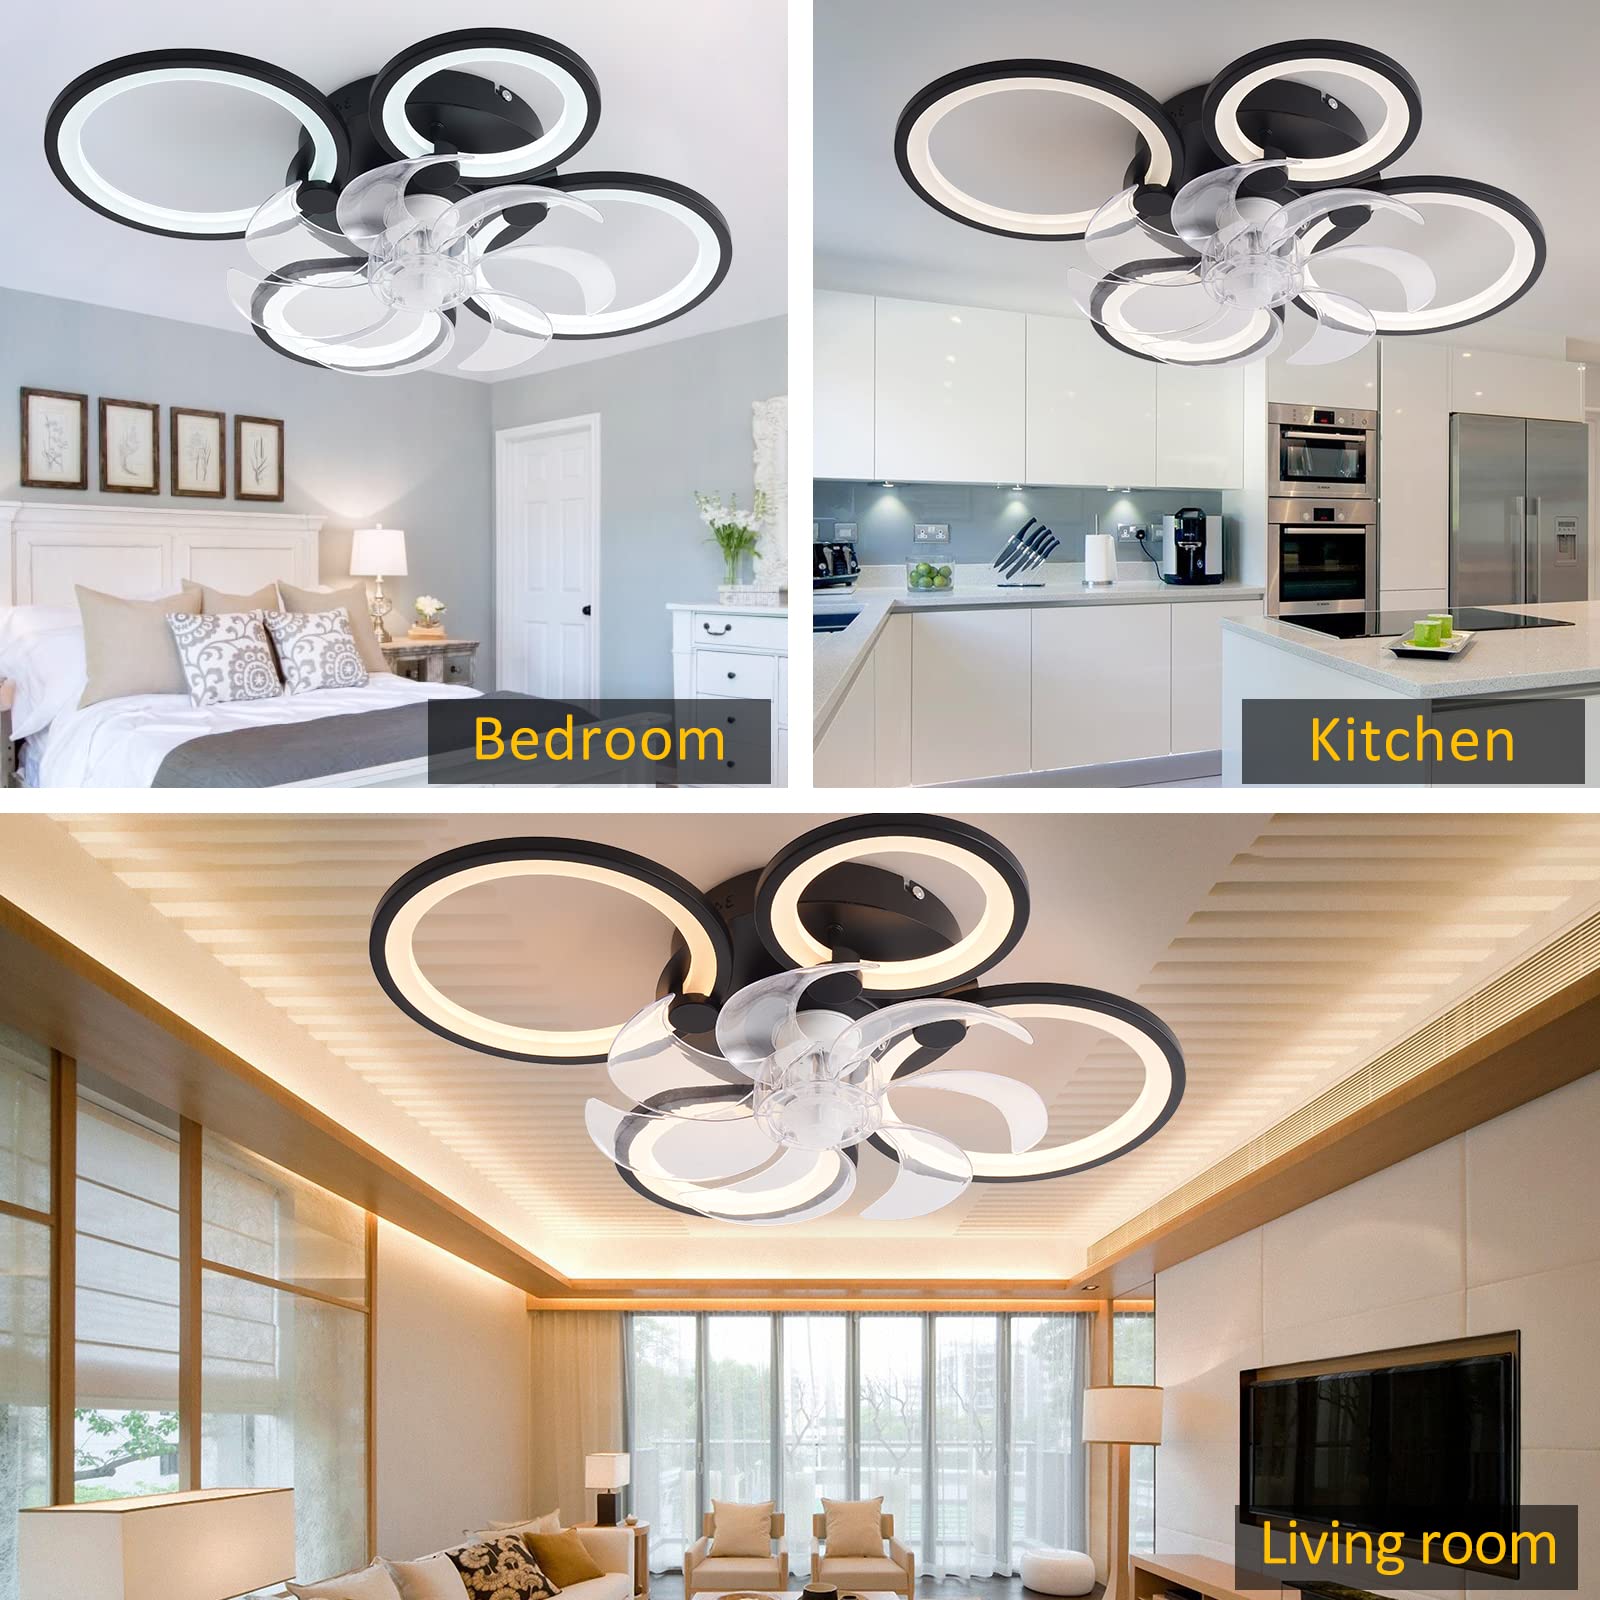 Panghuhu88 Flush Mount Bladeless Ceiling Fan with Light,Modern Low Profile Ceiling Fan Lighting Fixture with Remote Control 6 Speeds,Indoor Outdoor Bedroom Living Room